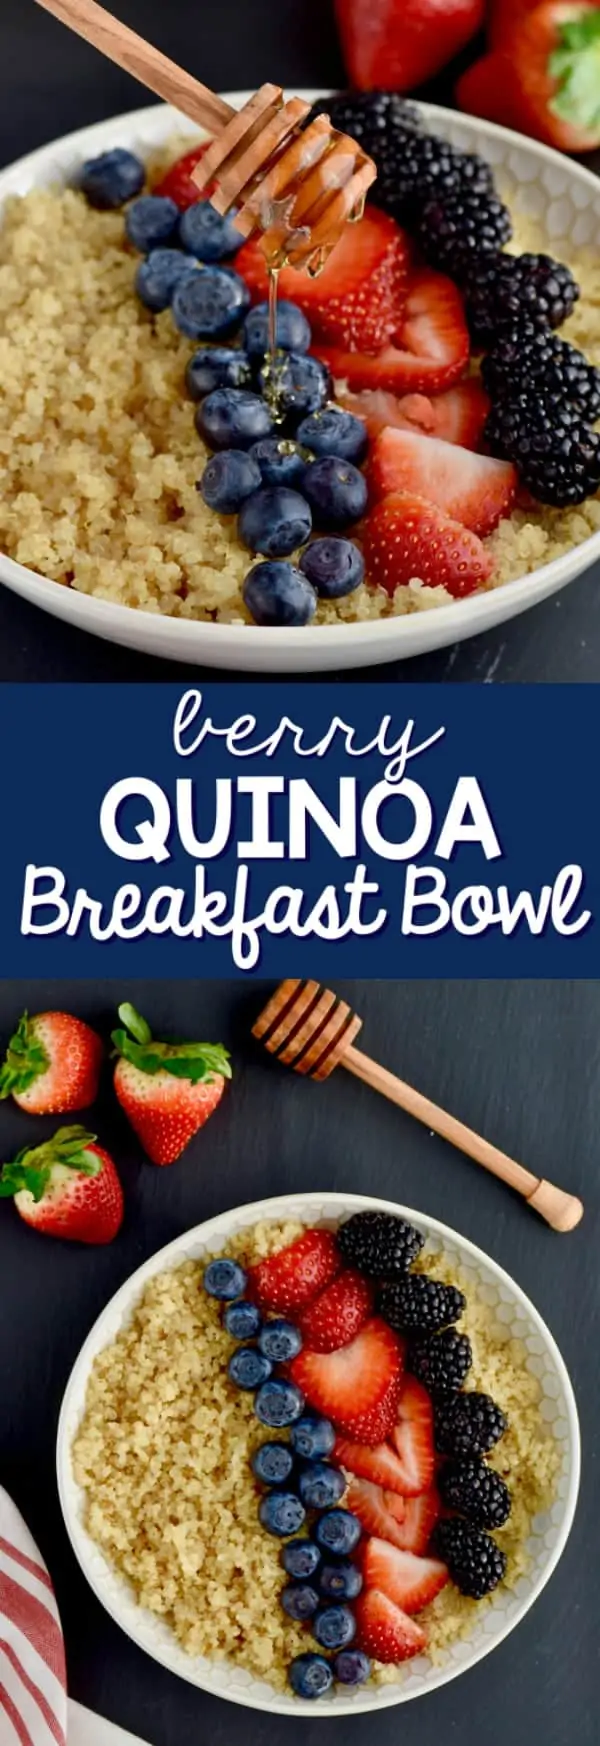 Photos of a bowl of Quinoa topped with blueberries, cut strawberries, and black berries. 